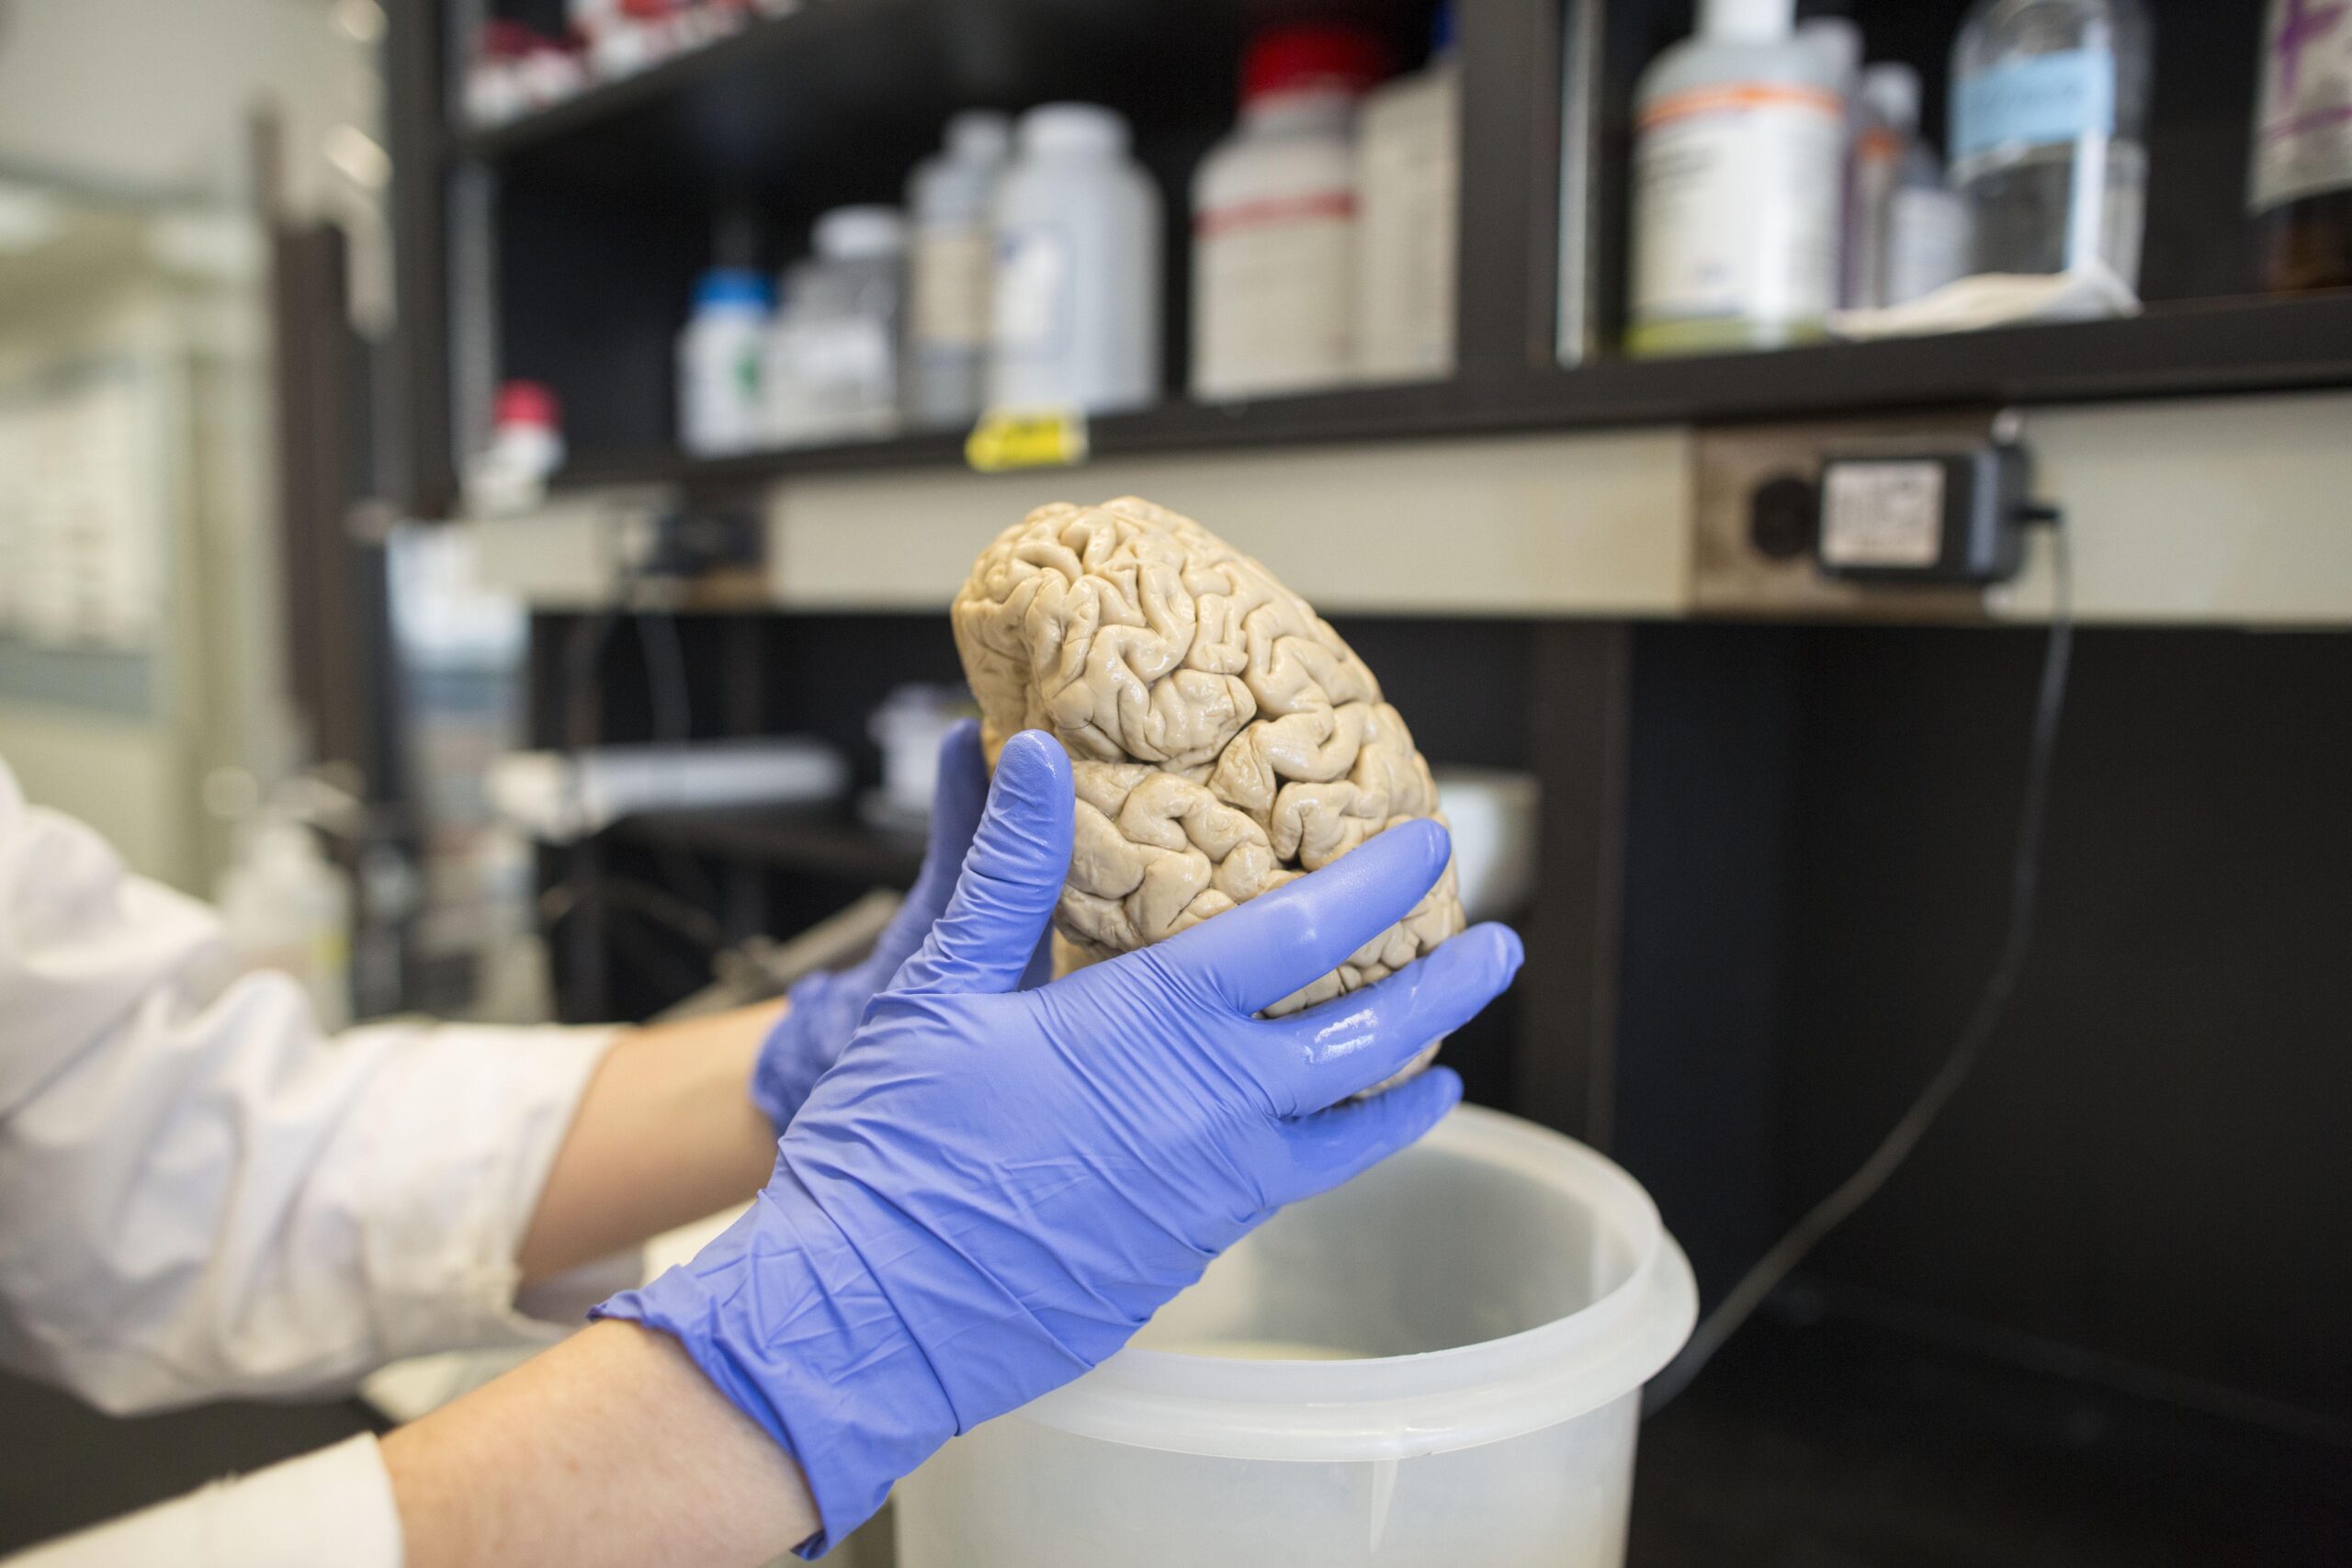 In this July 29, 2013 photo, a researcher holds a human brain in a laboratory at Northwestern University's cognitive neurology and Alzheimer's disease center in Chicago.